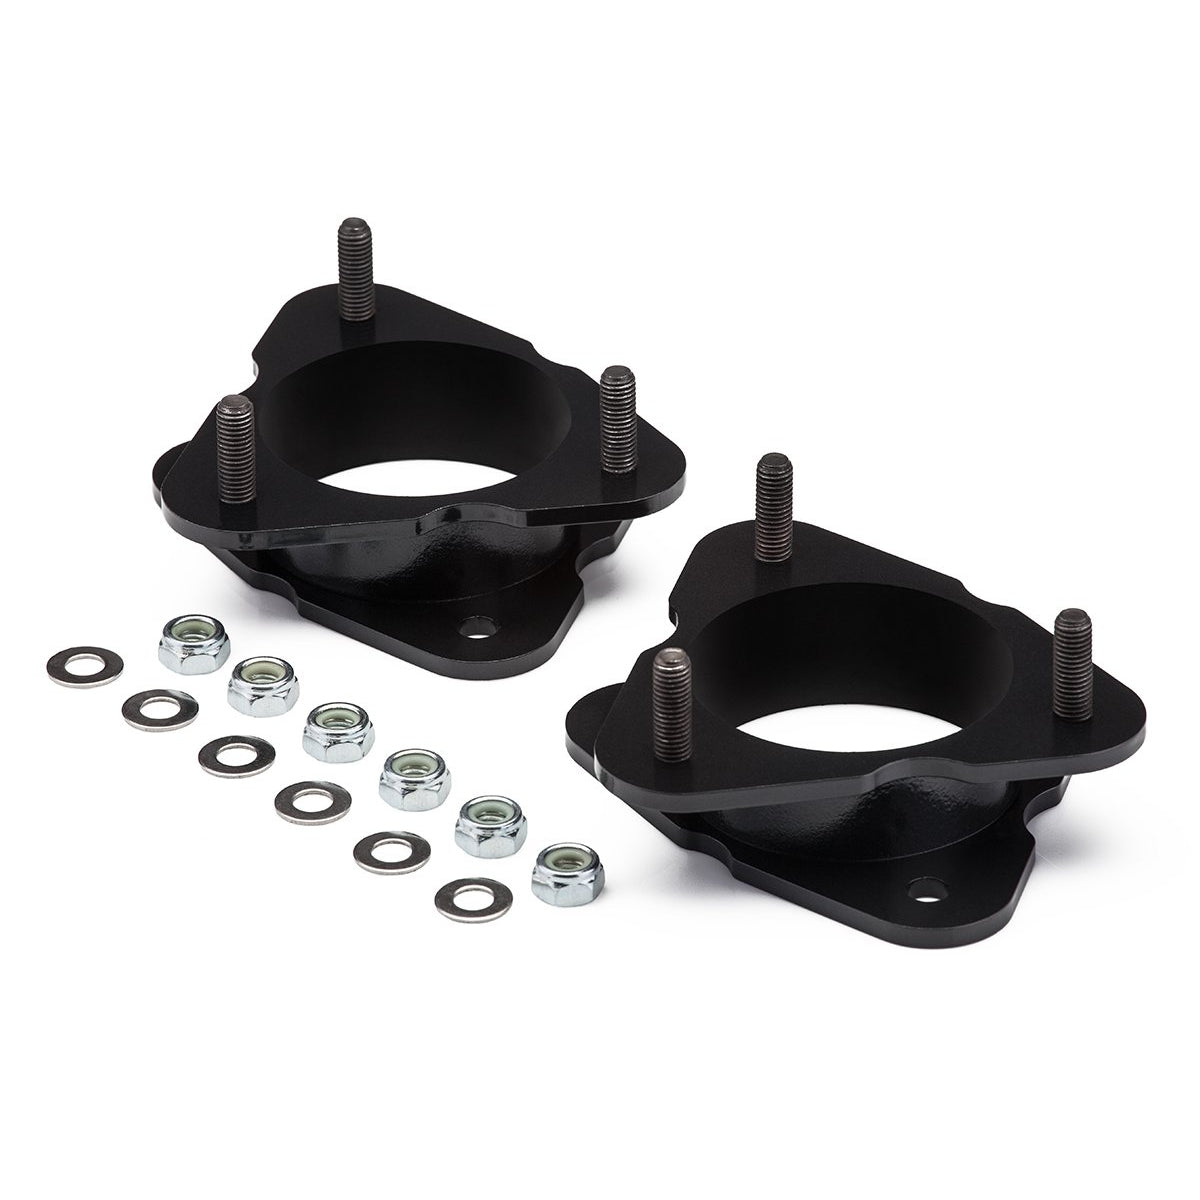 2007-2013 Chevy Avalanche 1500 Front Lift Kit